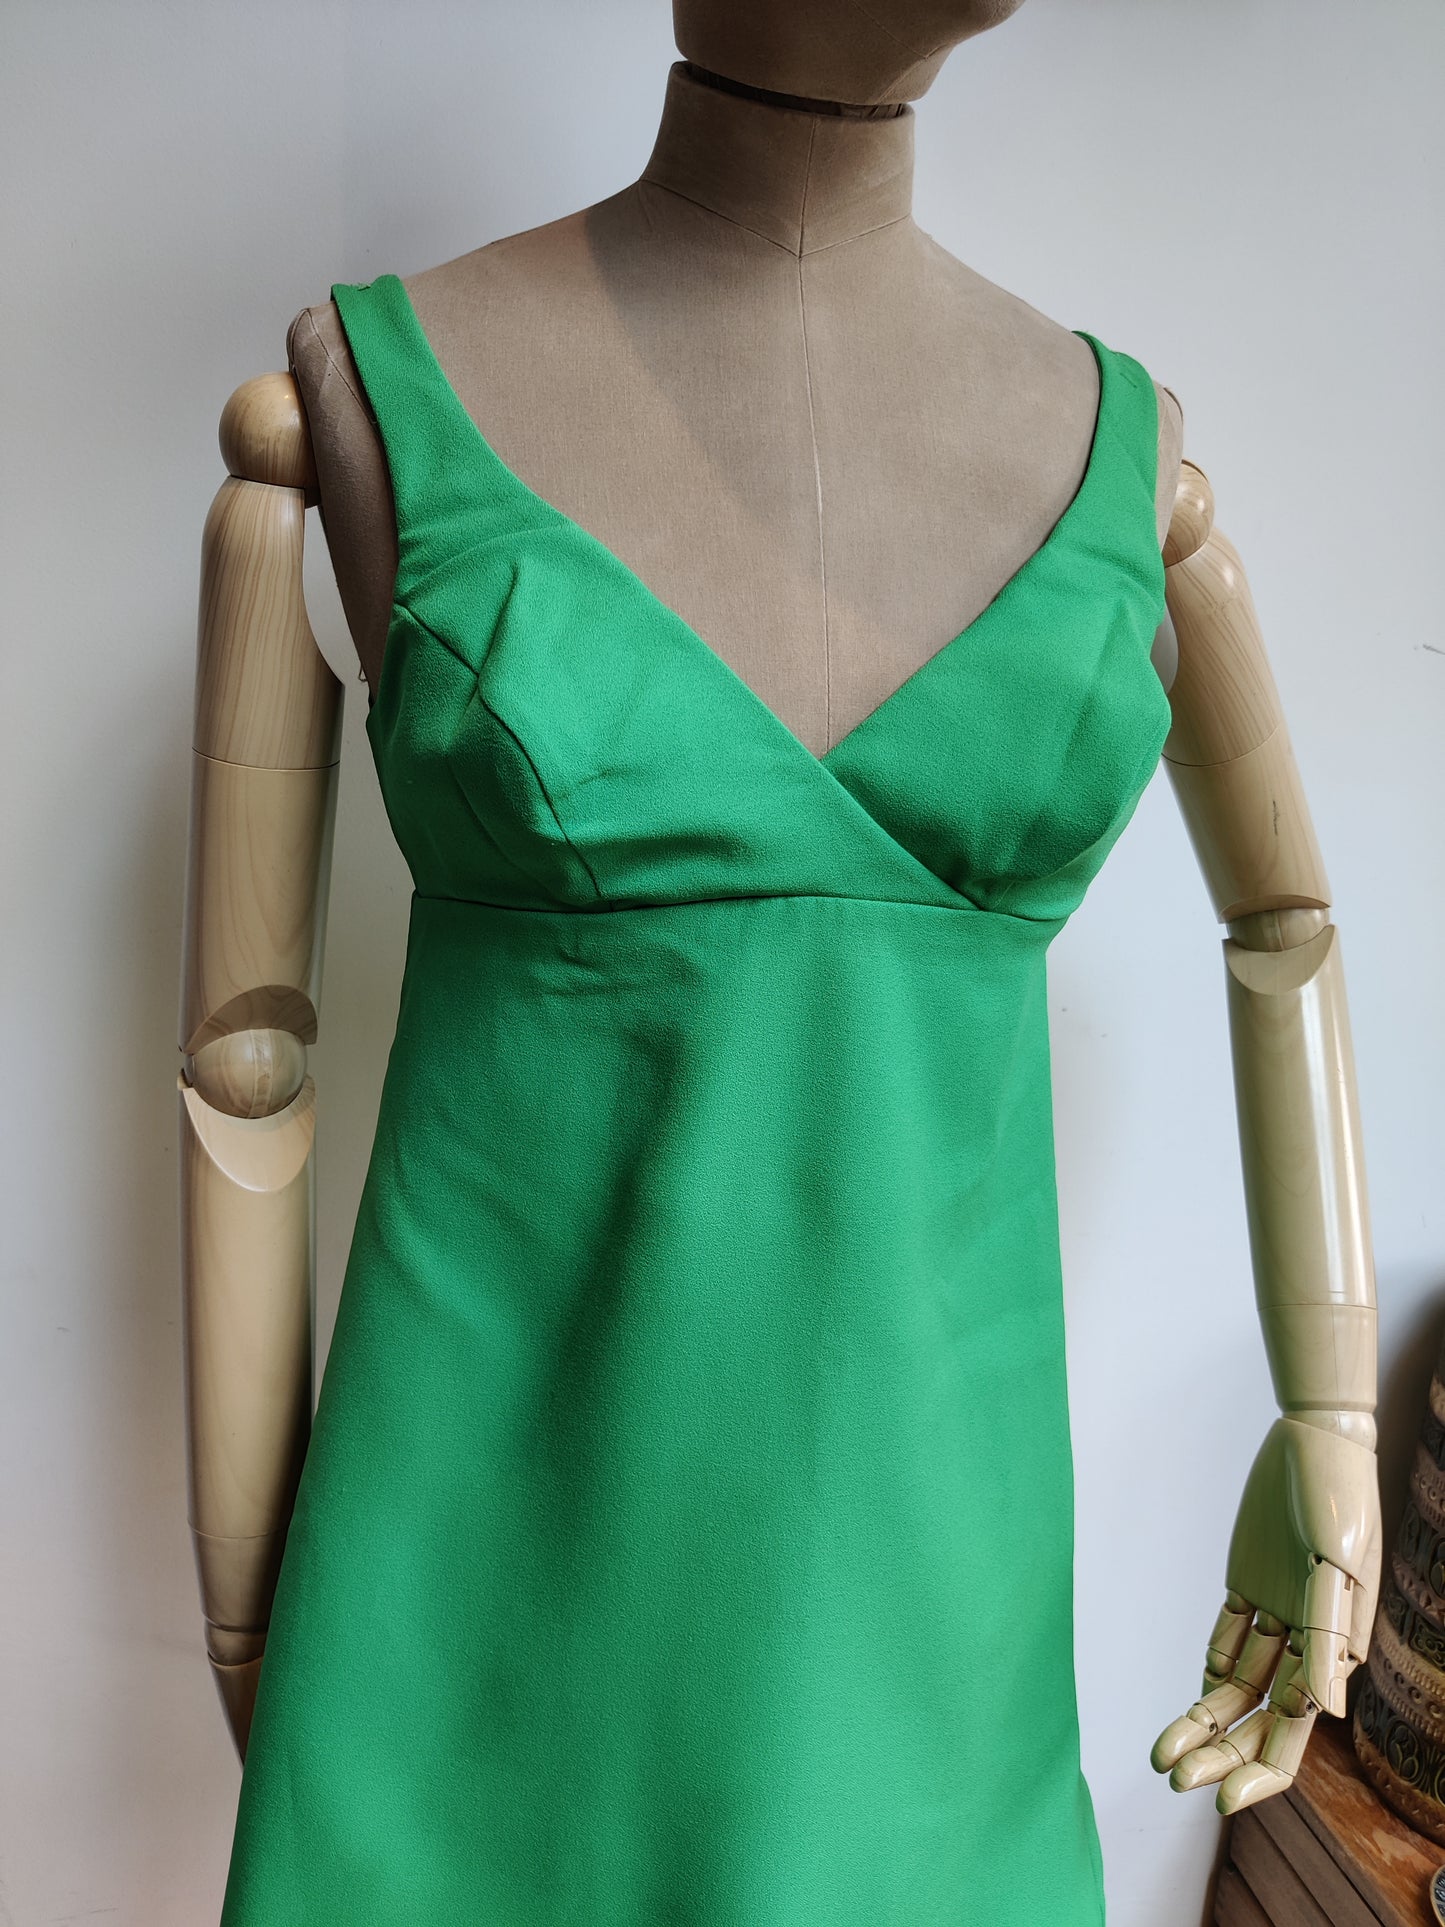 wrap over style mini dress in vibrant green